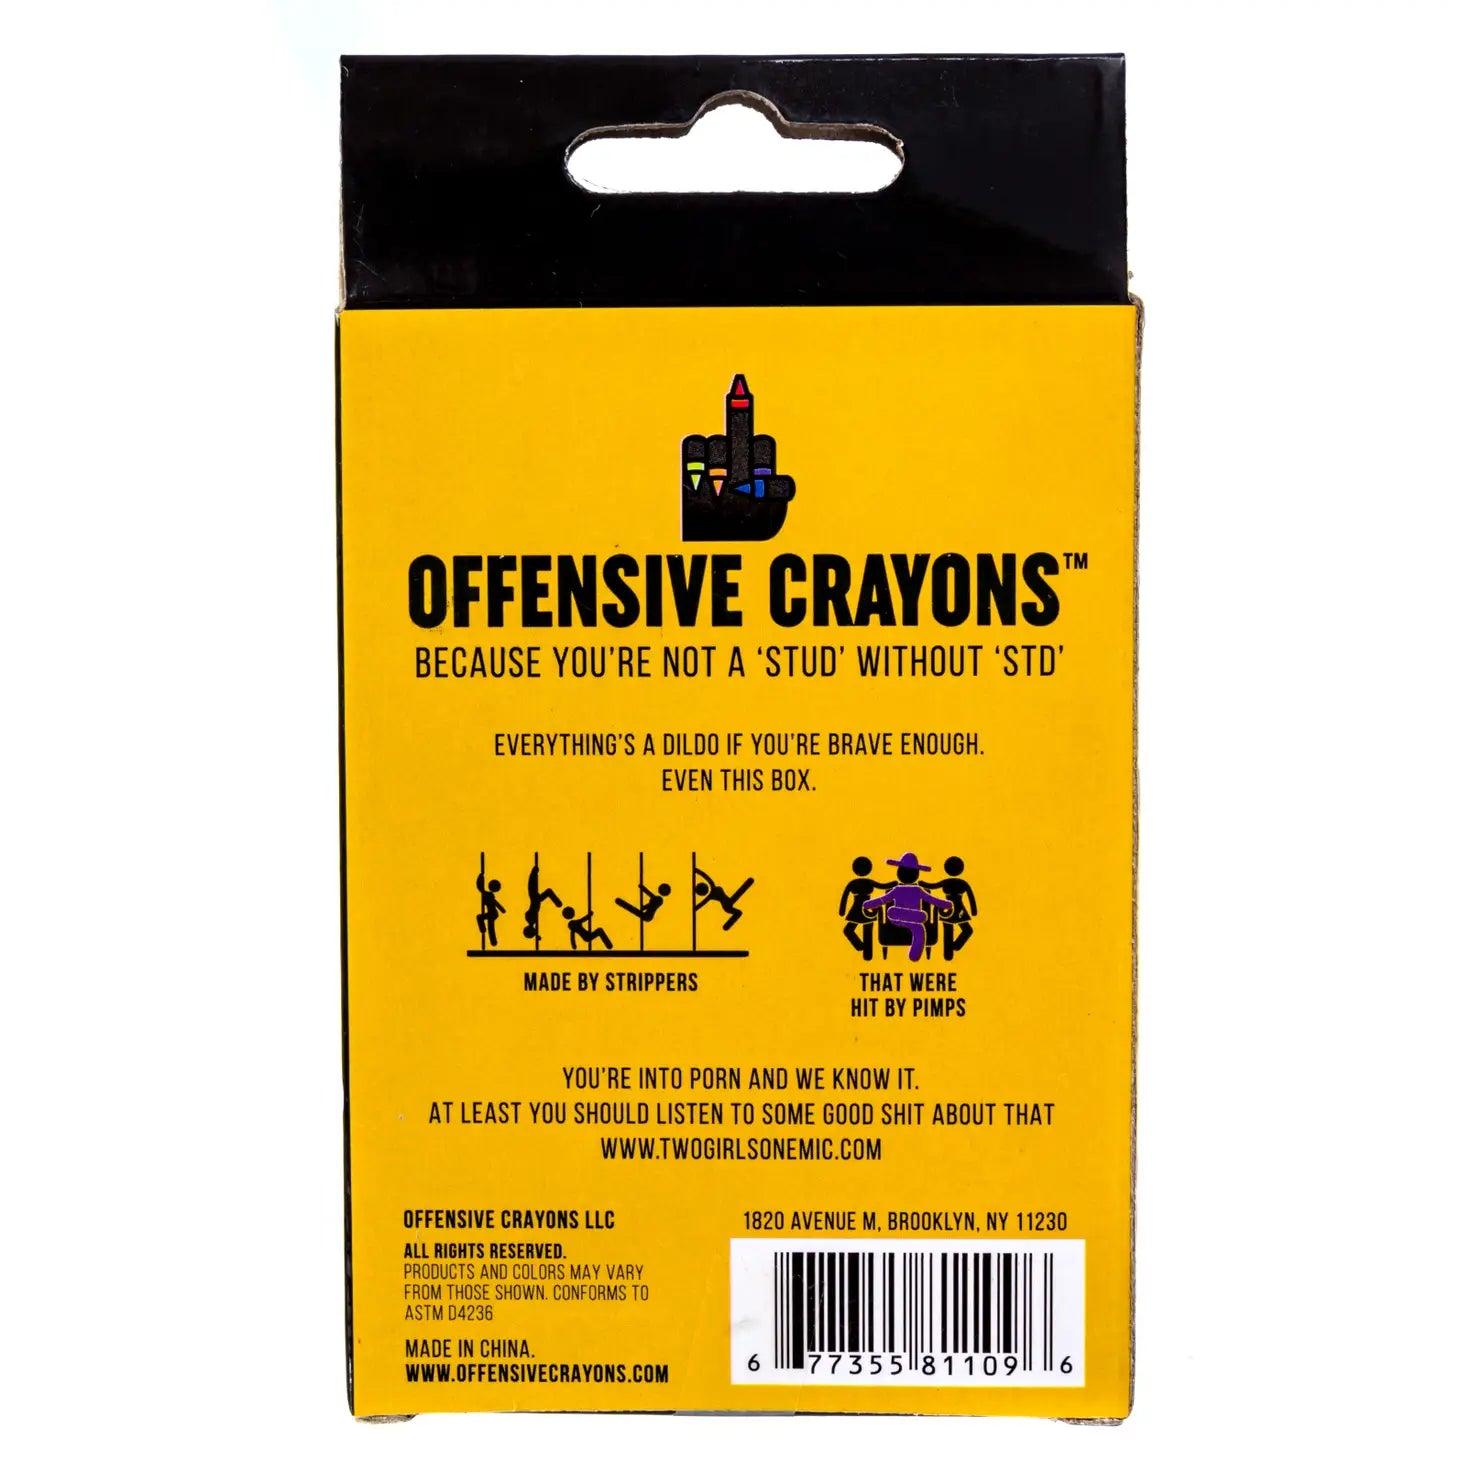 Offensive Crayons: Porn Pack /funny Gifts Gag Gift Funny 